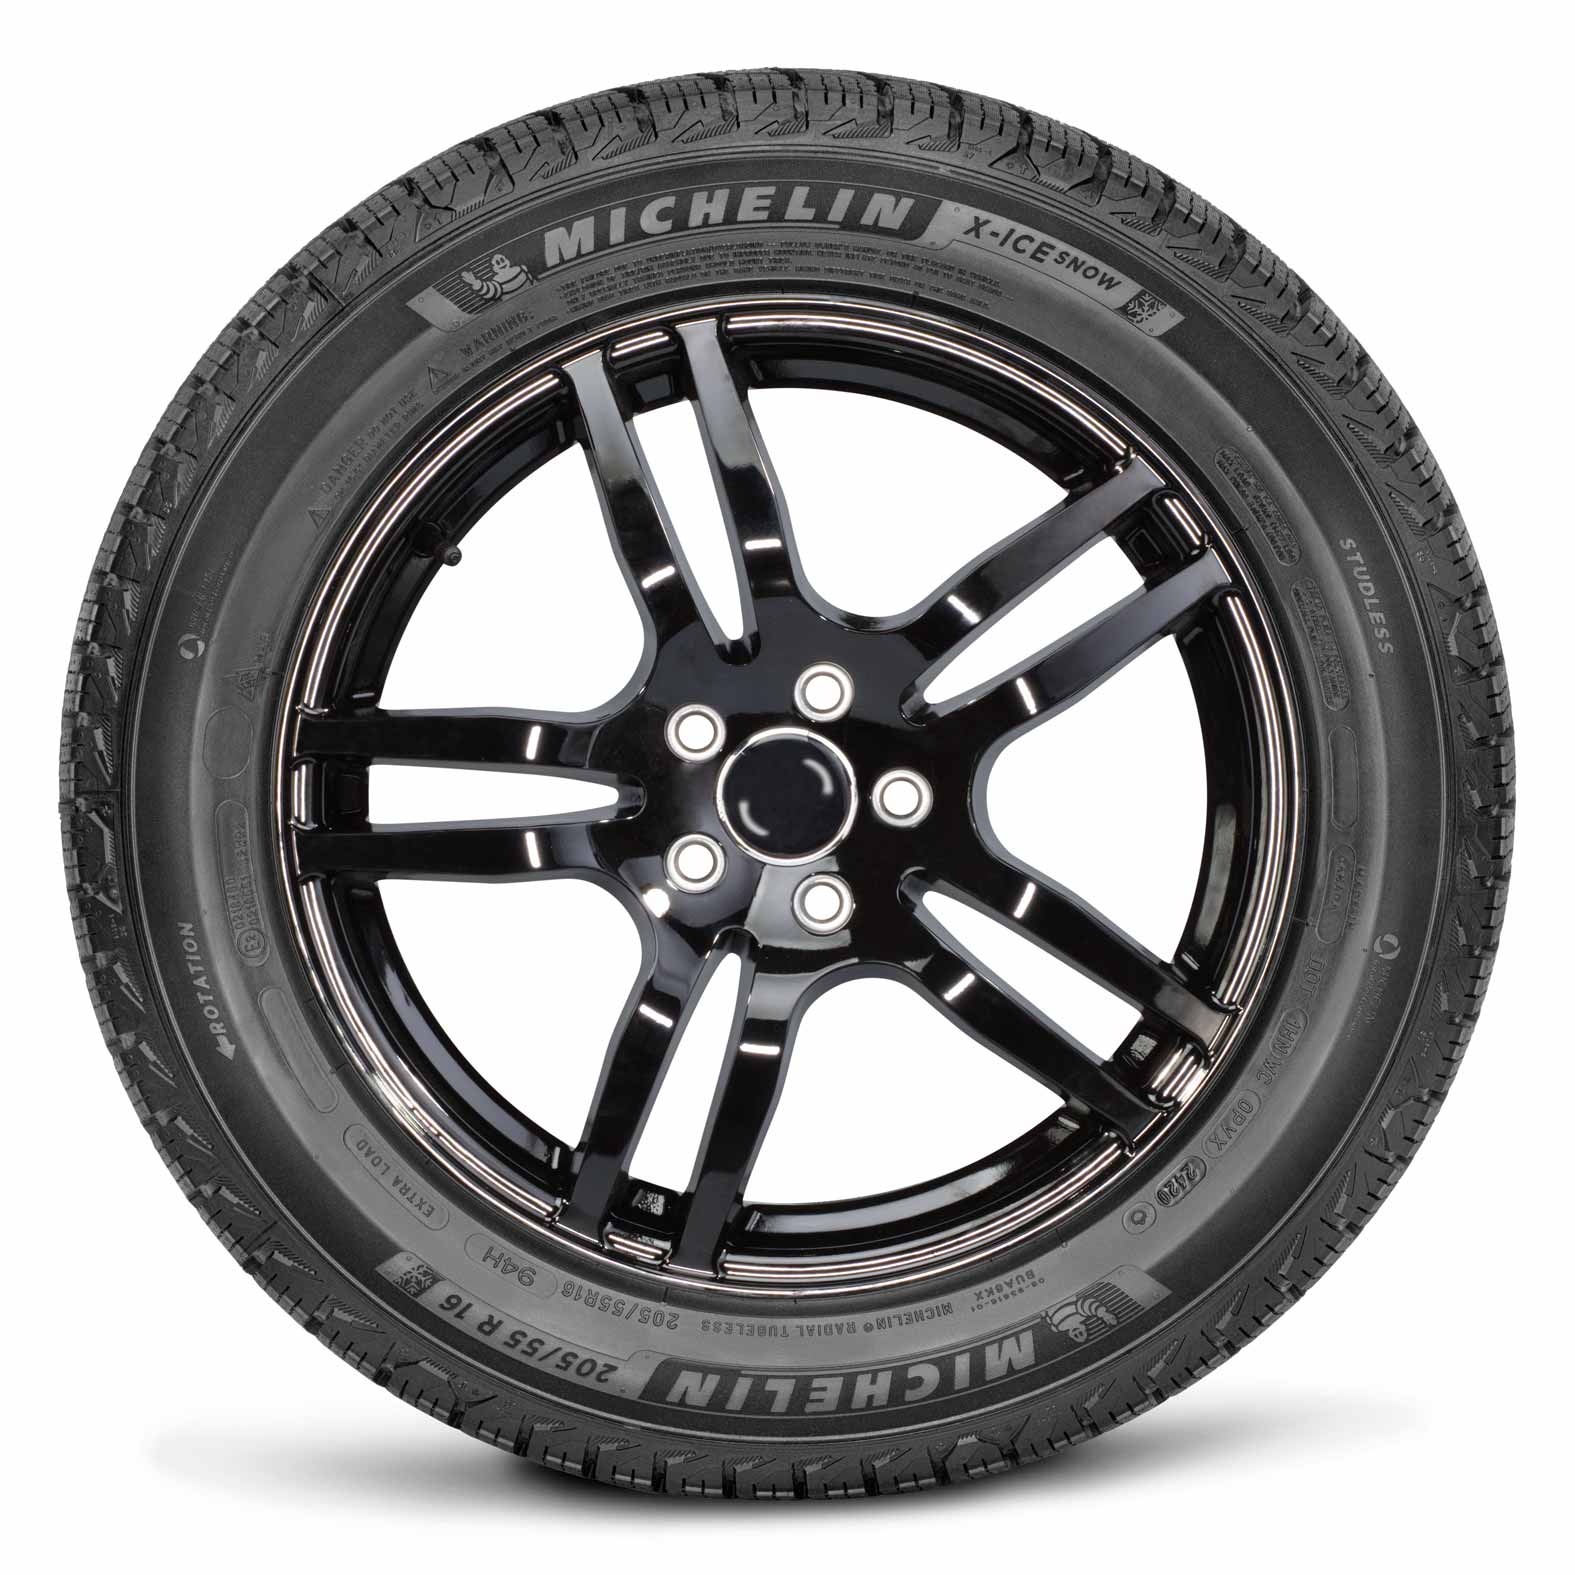 Winter | Kal Michelin X-Ice for Tire Tire Snow